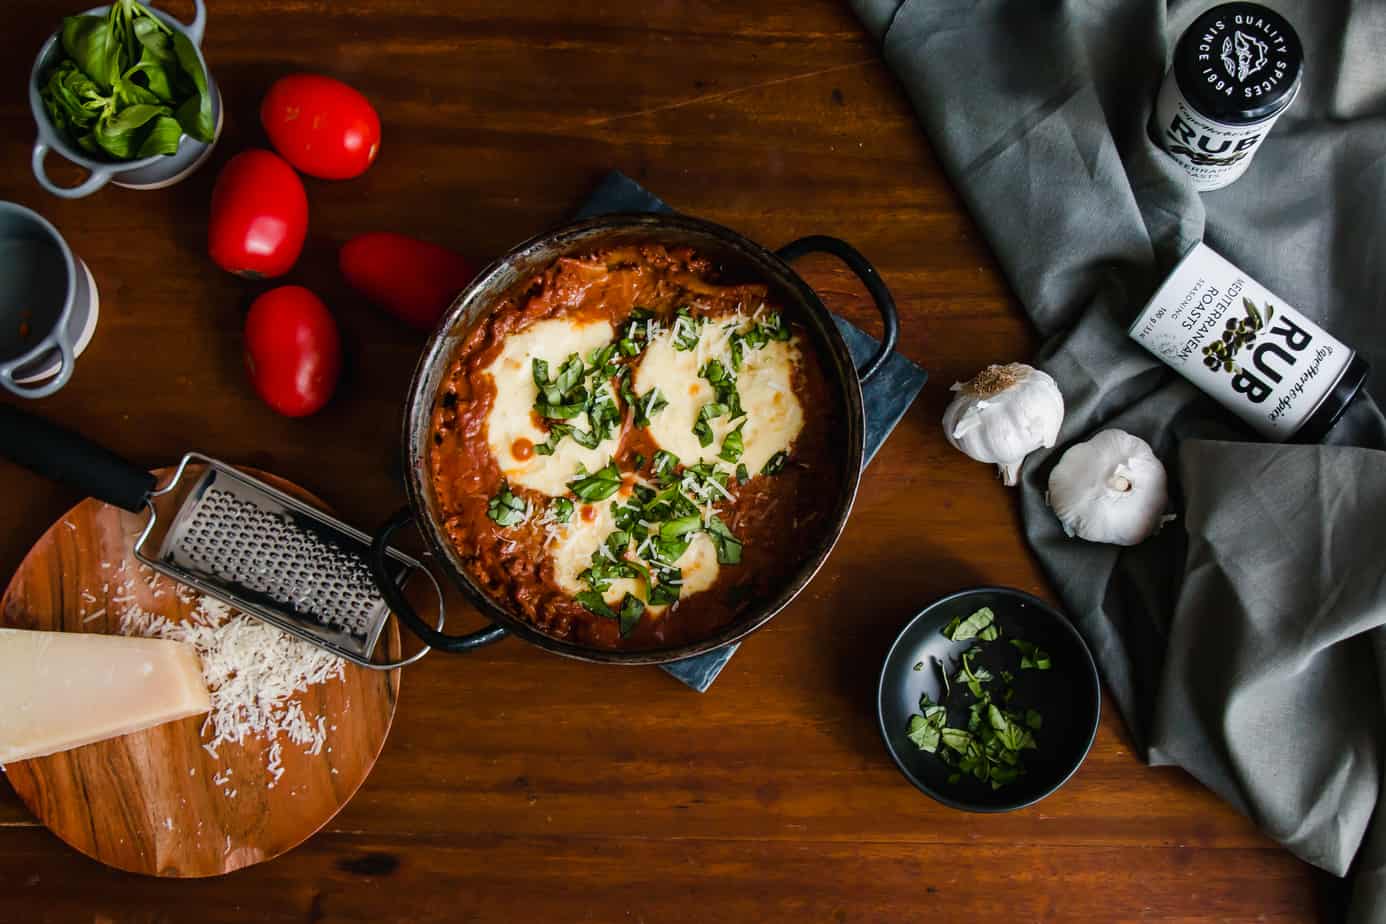 One of my favourite recipes of all time is this Hearty One Pot Lasagna. It really hits the spot if you're craving comfort food and a warm, hearty meal. It is uncomplicated and marvellous and the best part is - you can make it all in one pot! Here's to fewer dishes!